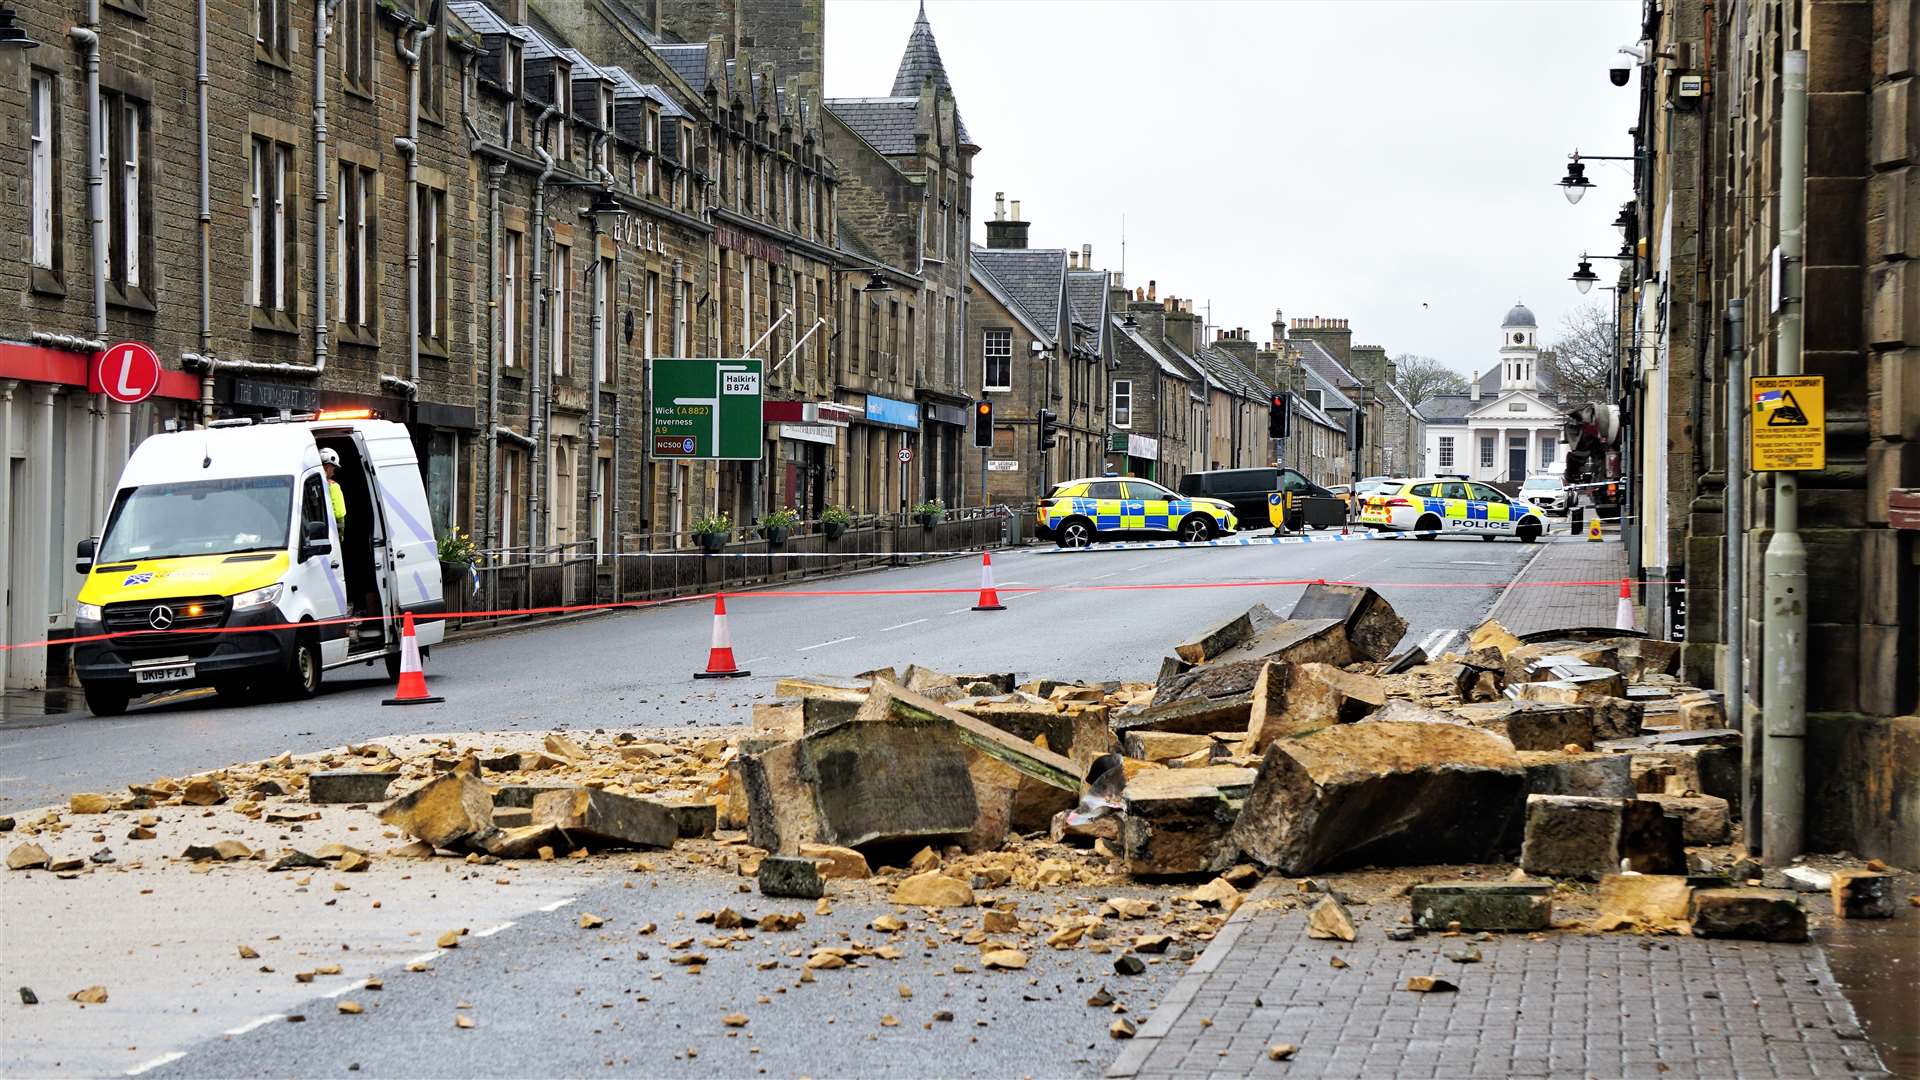 The scene on the morning of May 1 as tons of sandstone blocks lie on Traill Street after a roof parapet collapsed. Picture: DGS